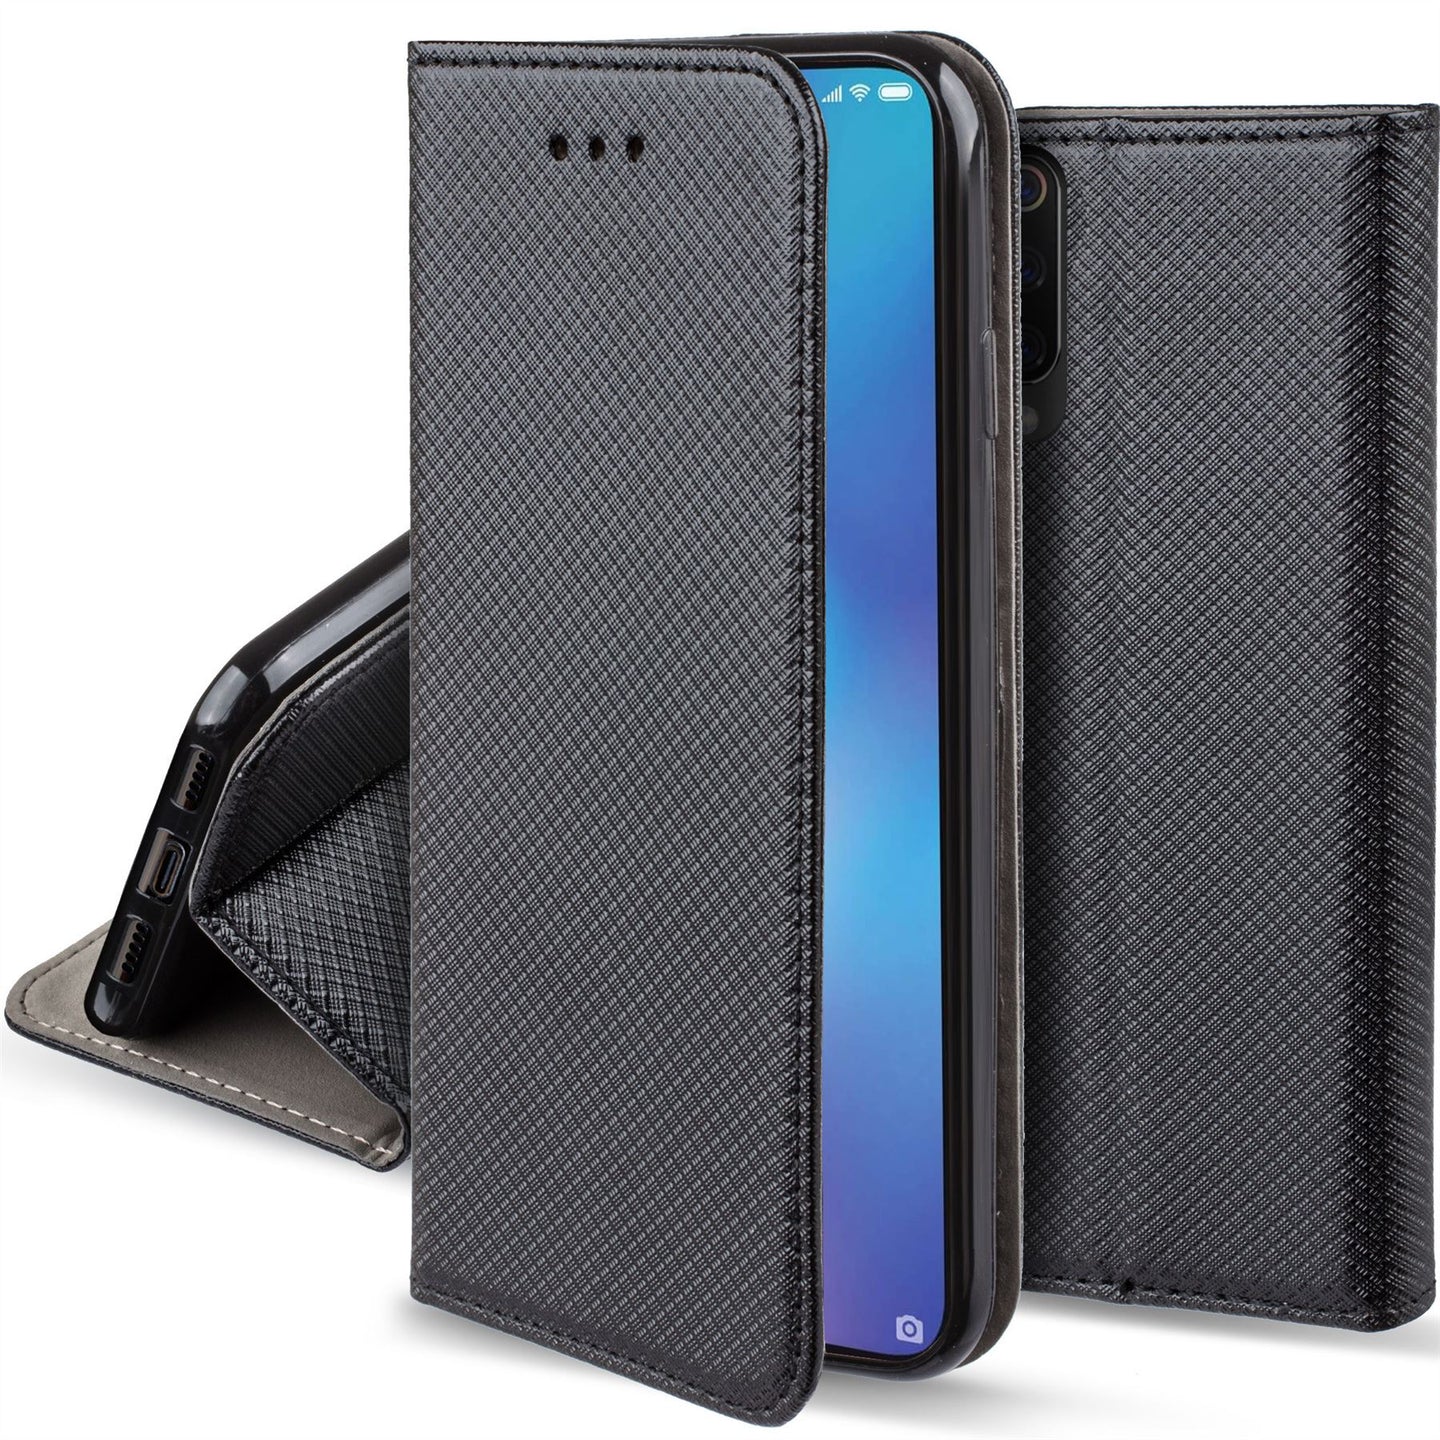 Moozy Case Flip Cover for Xiaomi Mi 9 SE, Black - Smart Magnetic Flip Case with Card Holder and Stand